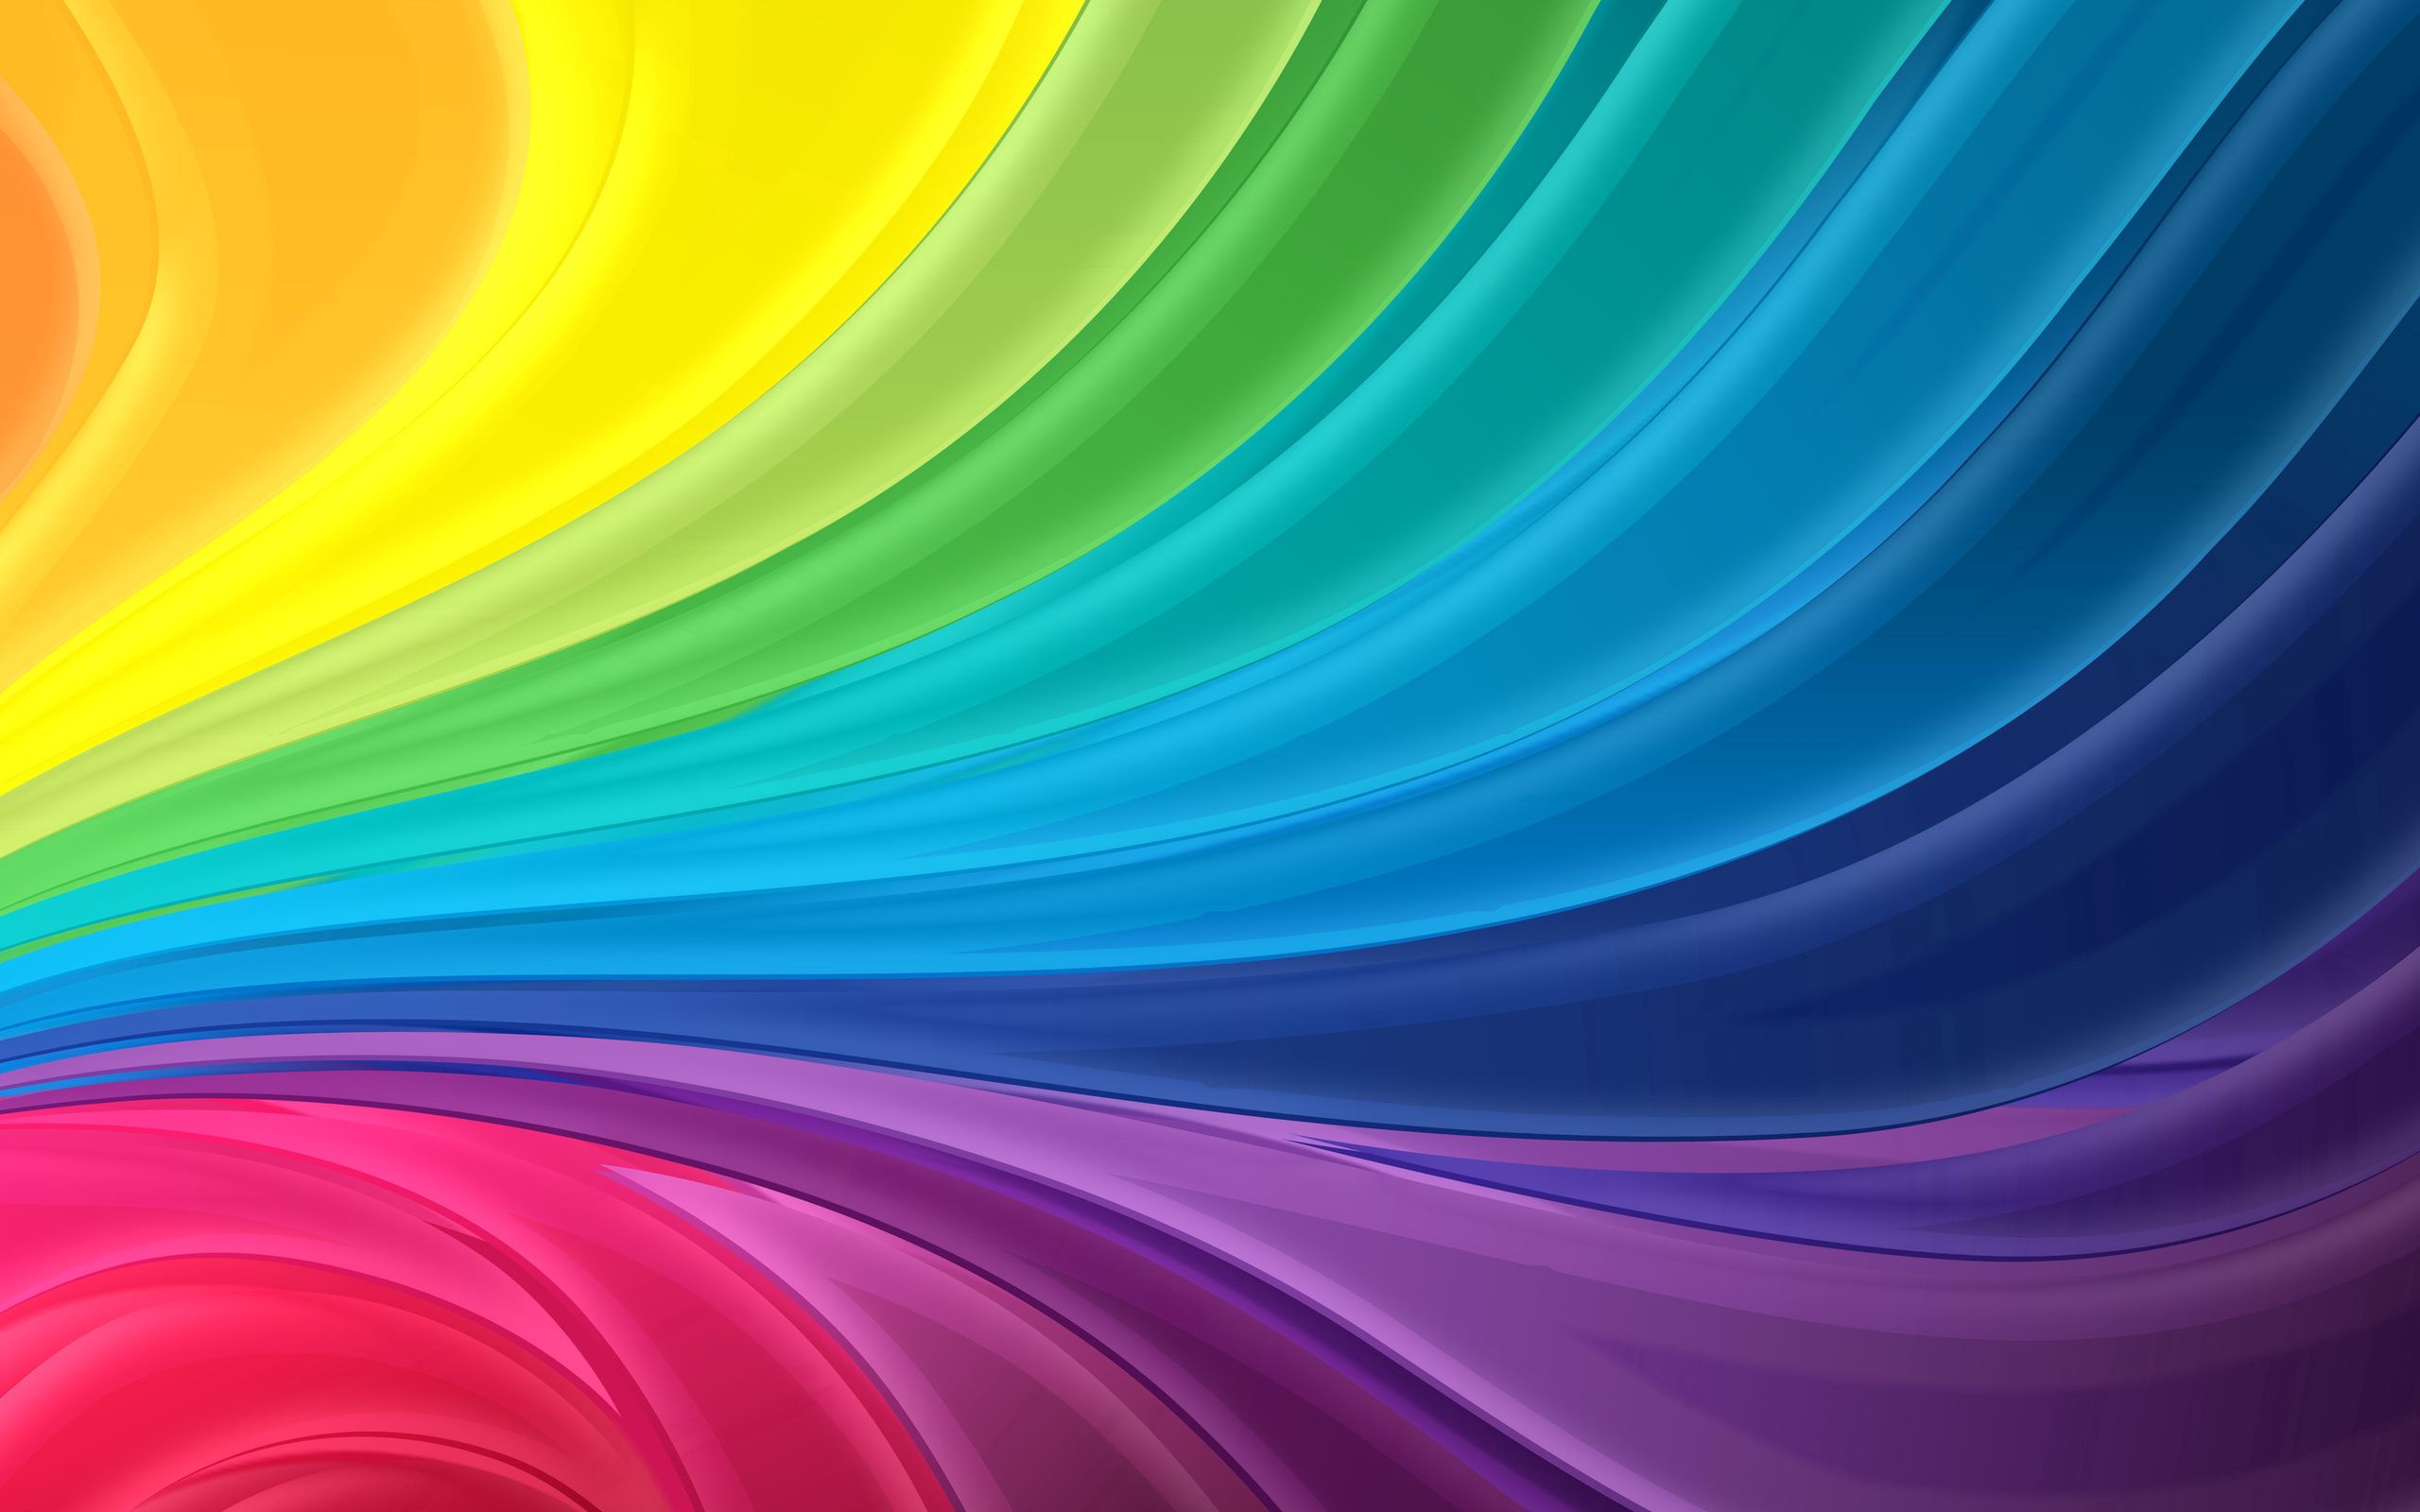 rainbow, colorful, colourful, lines, abstract, shine, light, iridescent wallpaper for mobile